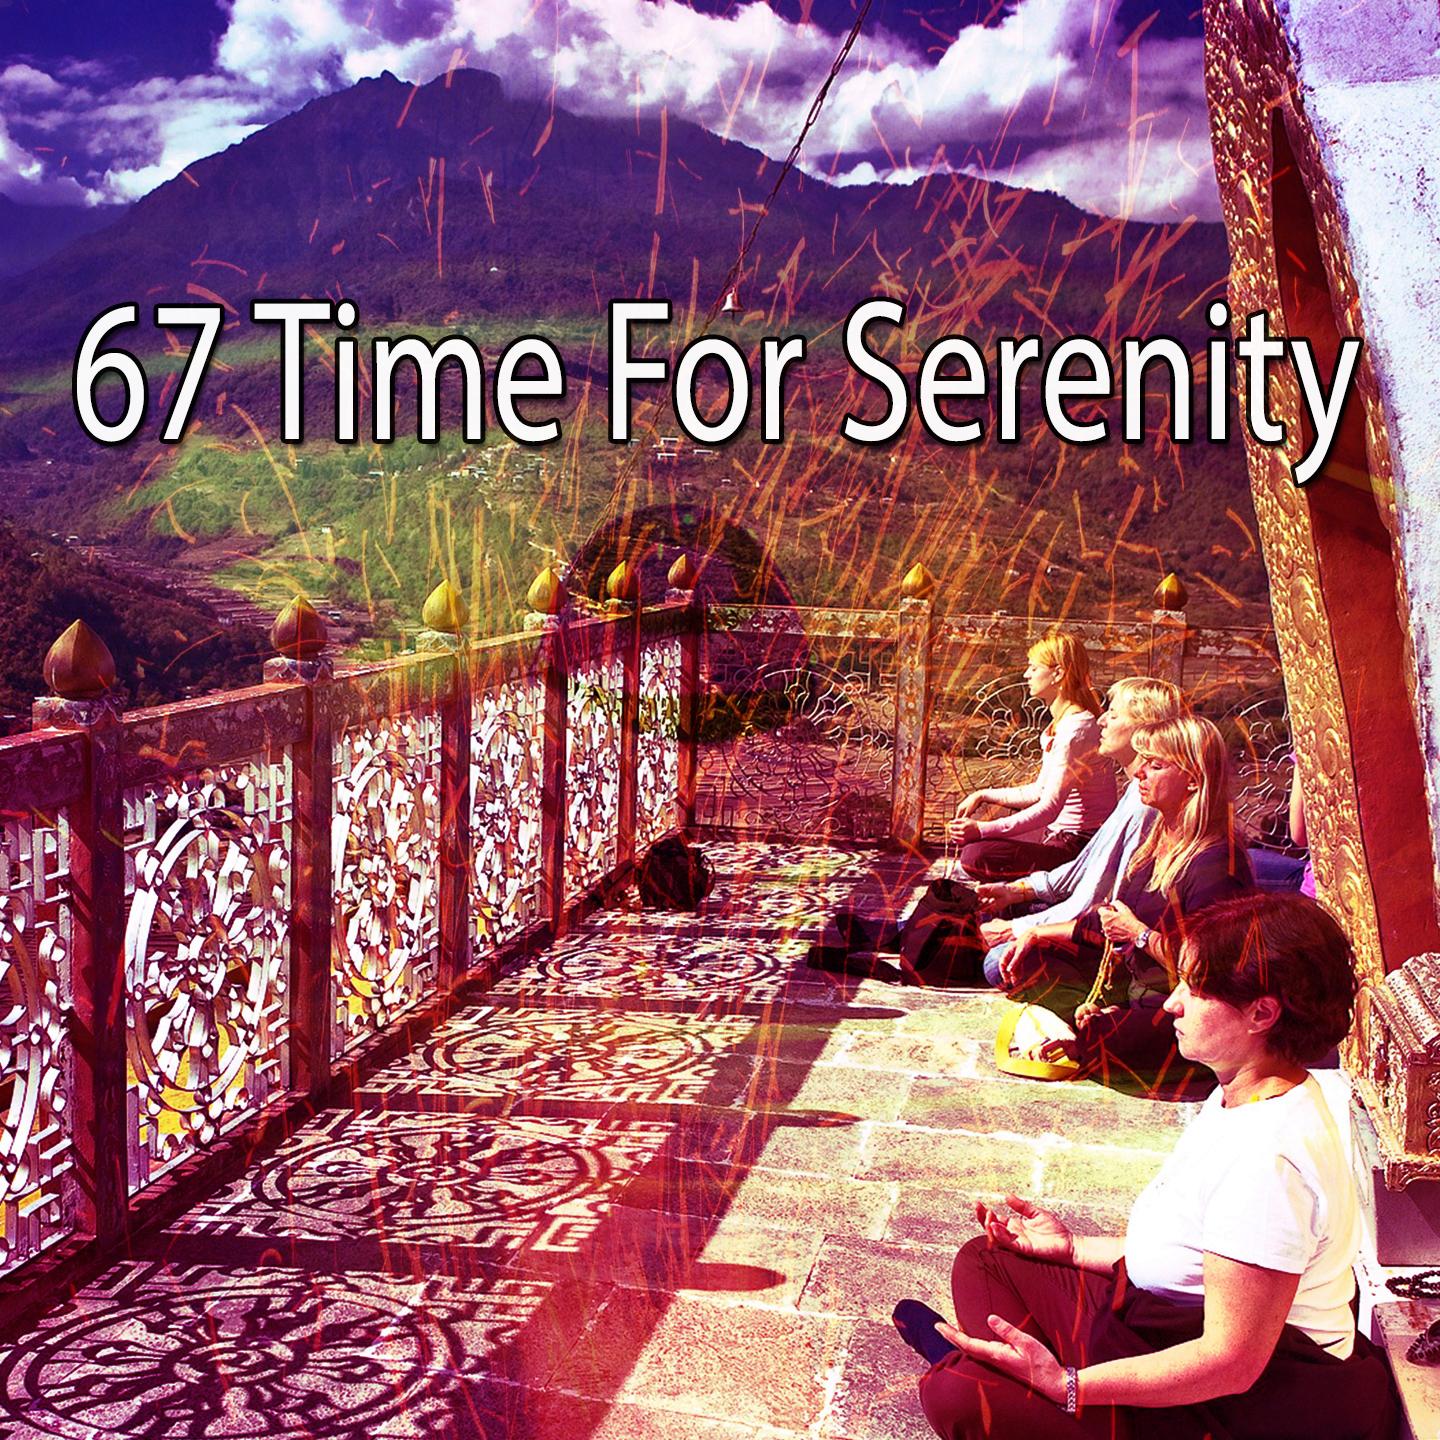 67 Time for Serenity